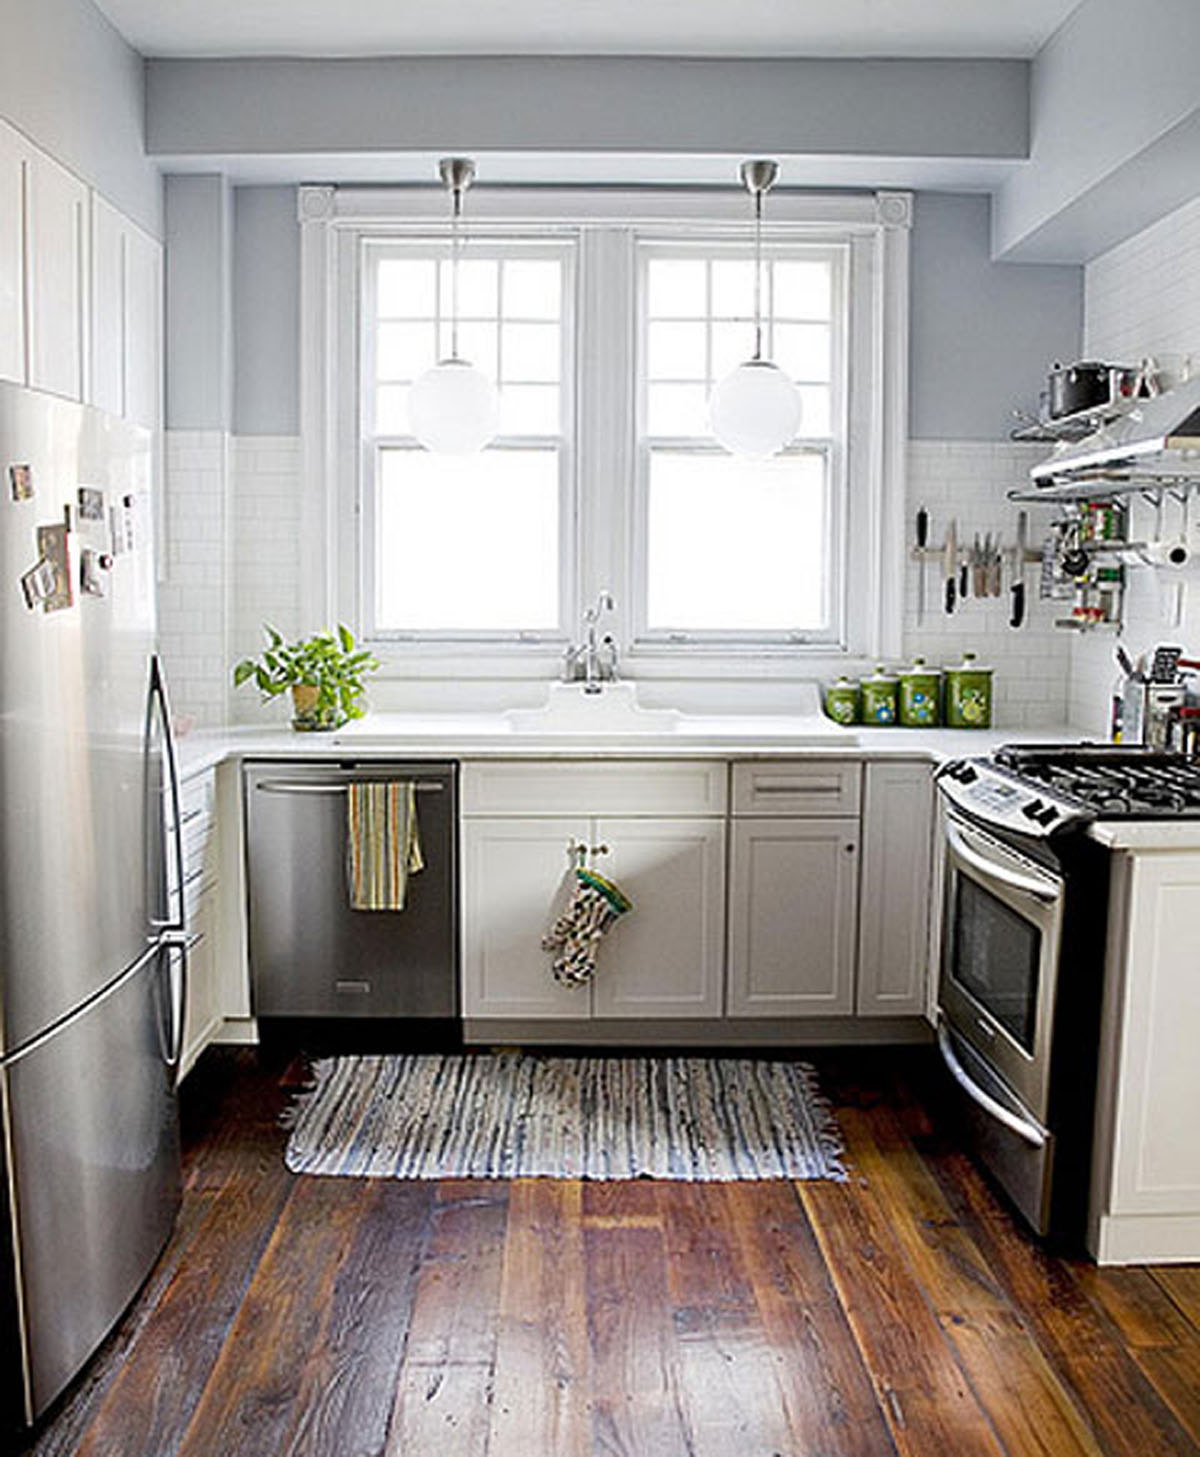 Navigating Small Kitchens: Design Ideas For Cooking In Compact Areas